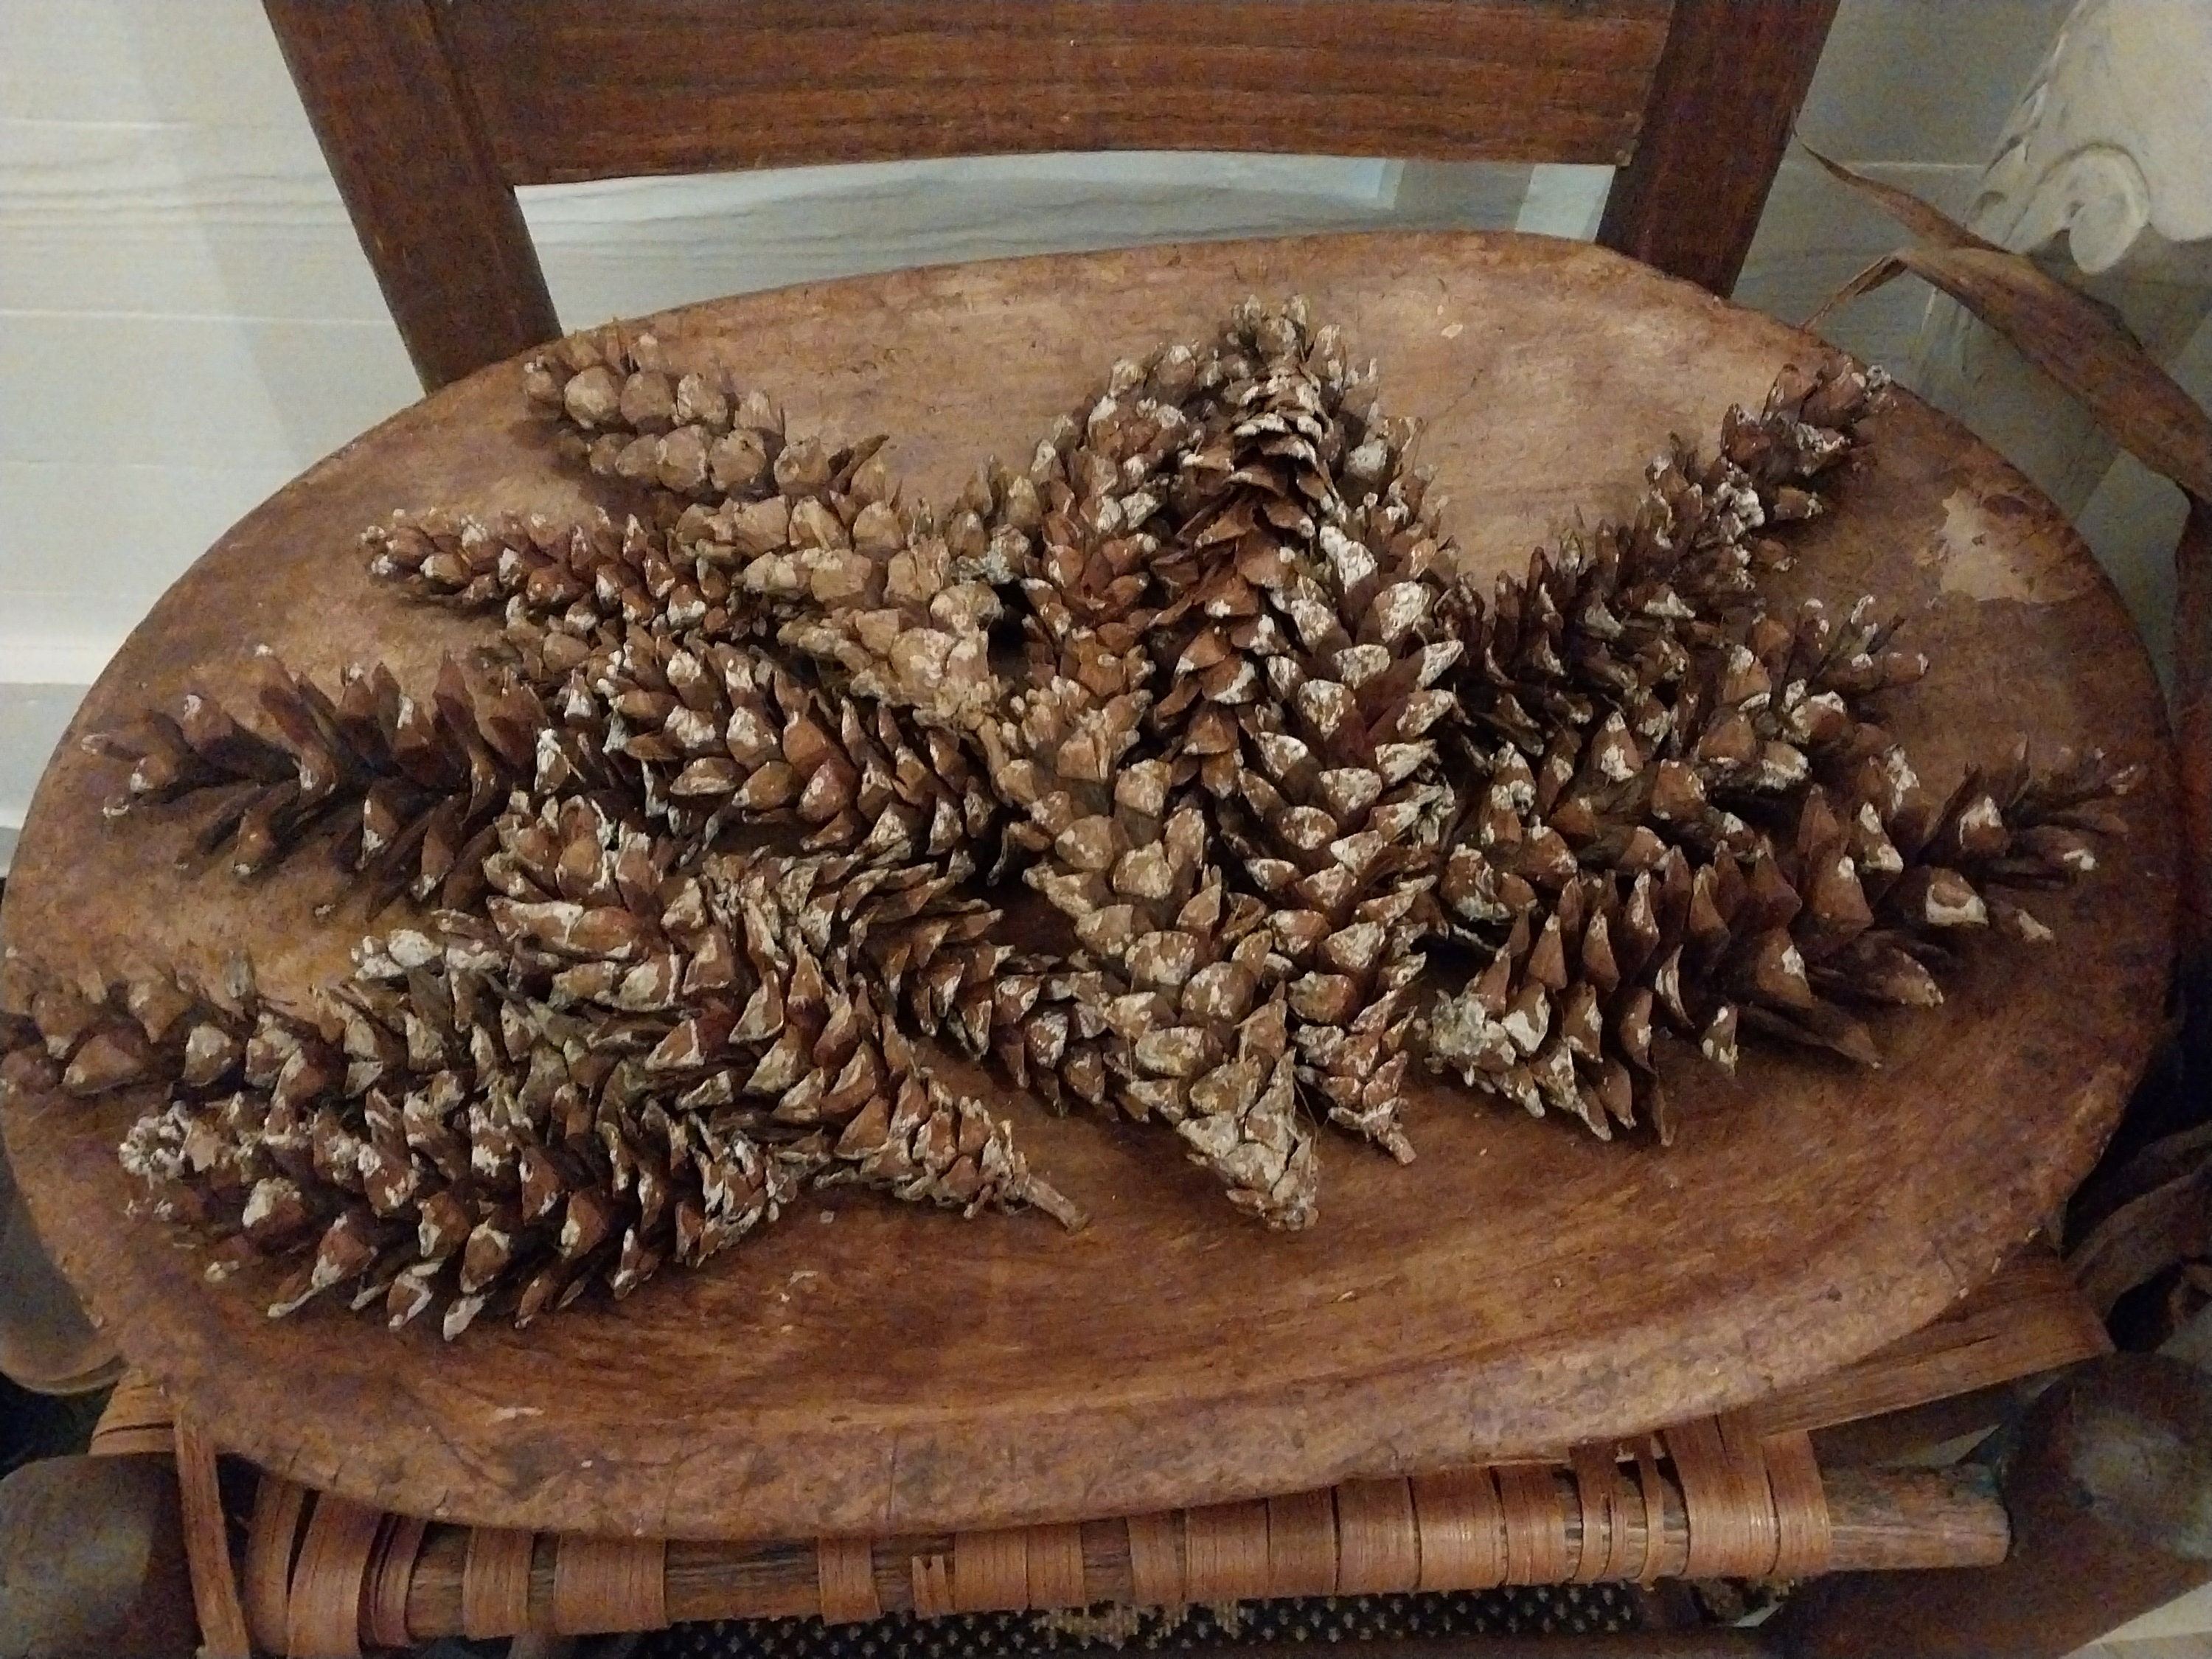 Pine Cones, White Pine, 25 Count – Bring Outdoors Indoors